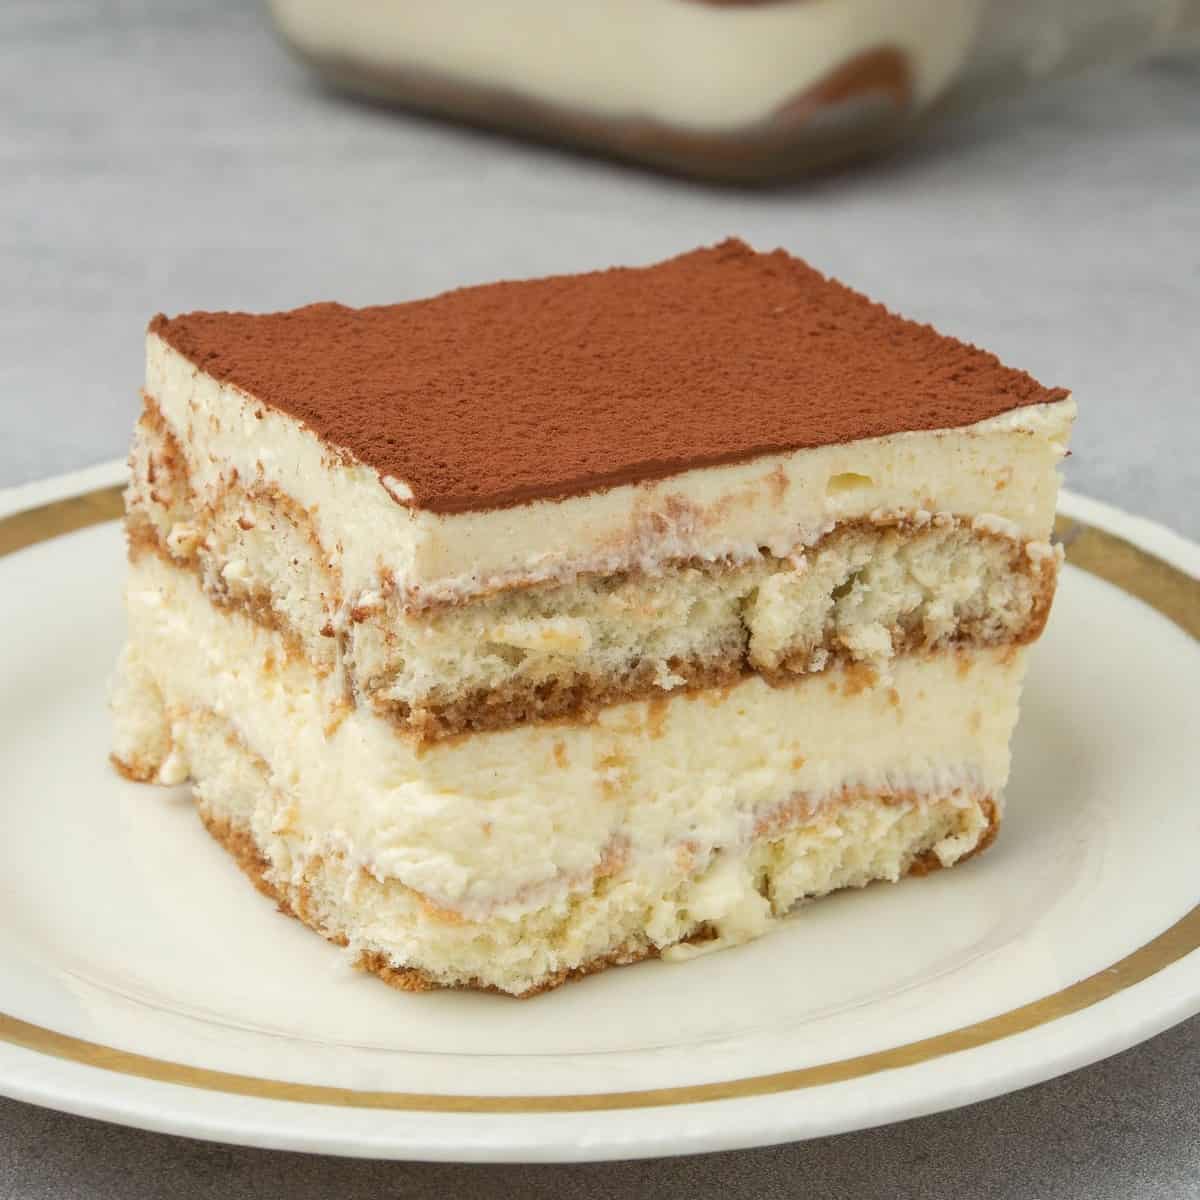 <p>This Authentic Italian <strong><a href="https://www.spatuladesserts.com/home-made-tiramisu-recipe-from-scratch/">Tiramisu</a></strong> features homemade airy ladyfingers that are layered in between light mascarpone cream, rich espresso, and a touch of cocoa finish. Dolce vita! You absolutely have to make this recipe, no excuse!</p> <p><strong>Go to the recipe: <a href="https://www.spatuladesserts.com/home-made-tiramisu-recipe-from-scratch/">Tiramisu</a></strong></p>